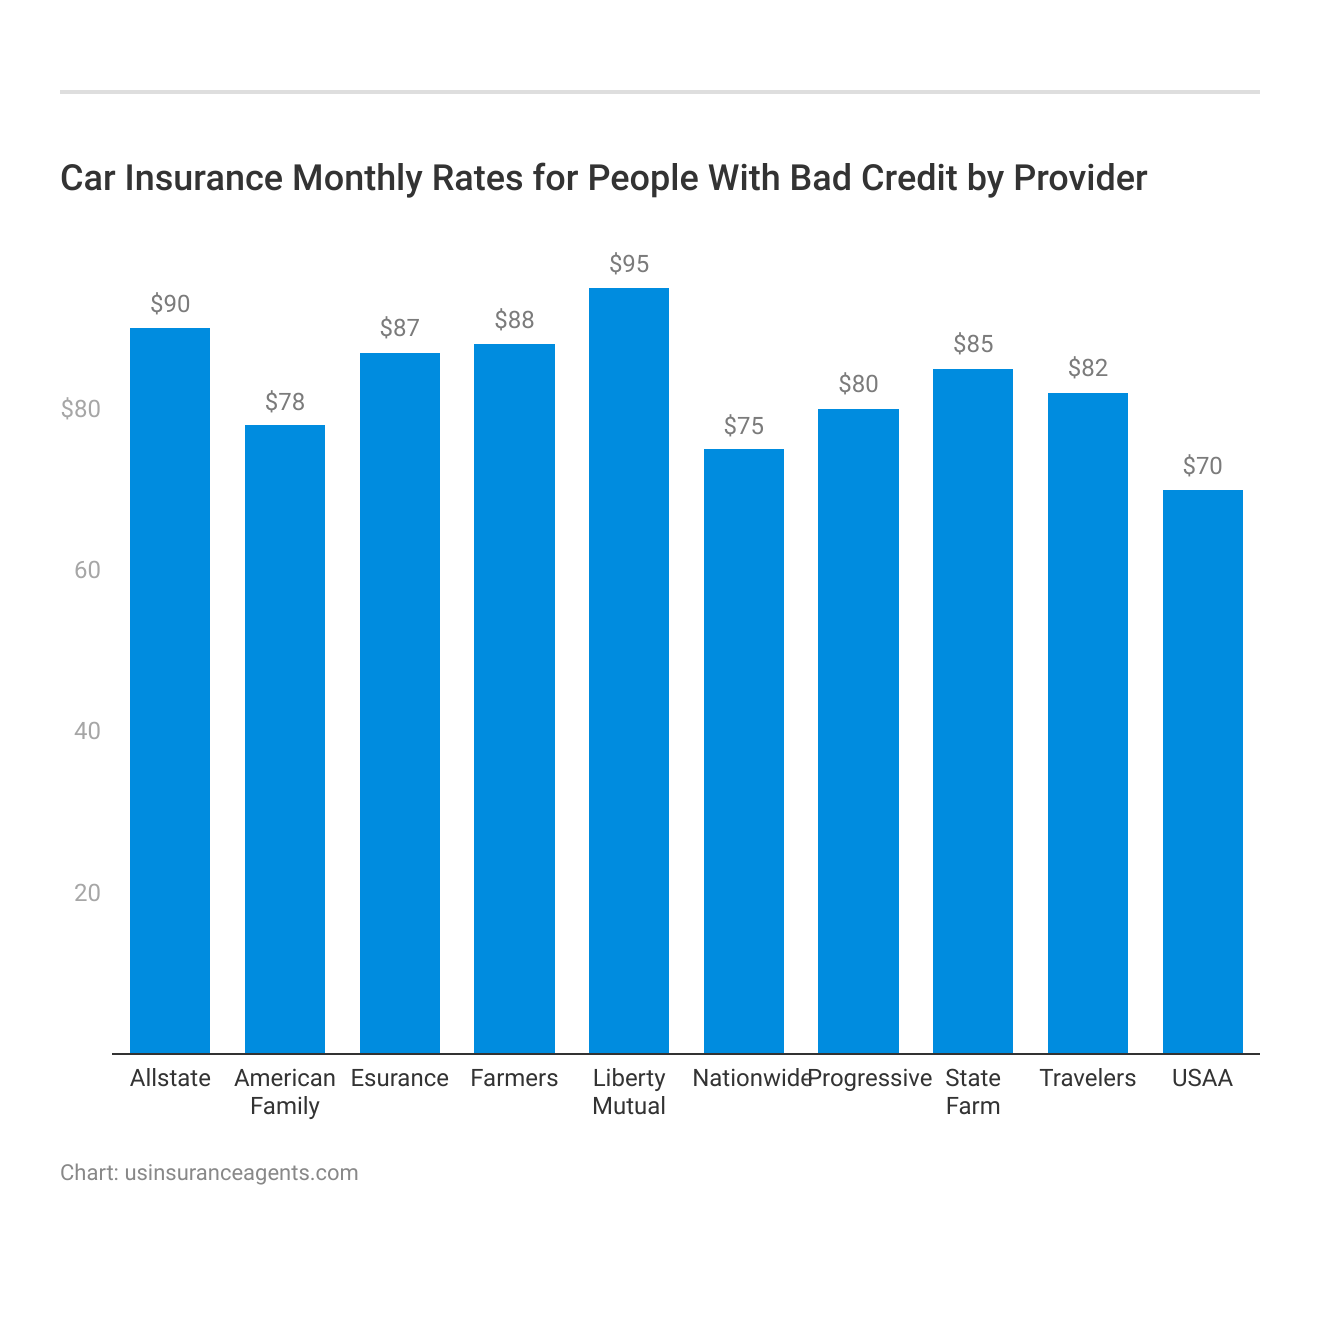 <h3>Car Insurance Monthly Rates for People With Bad Credit by Provider</h3>